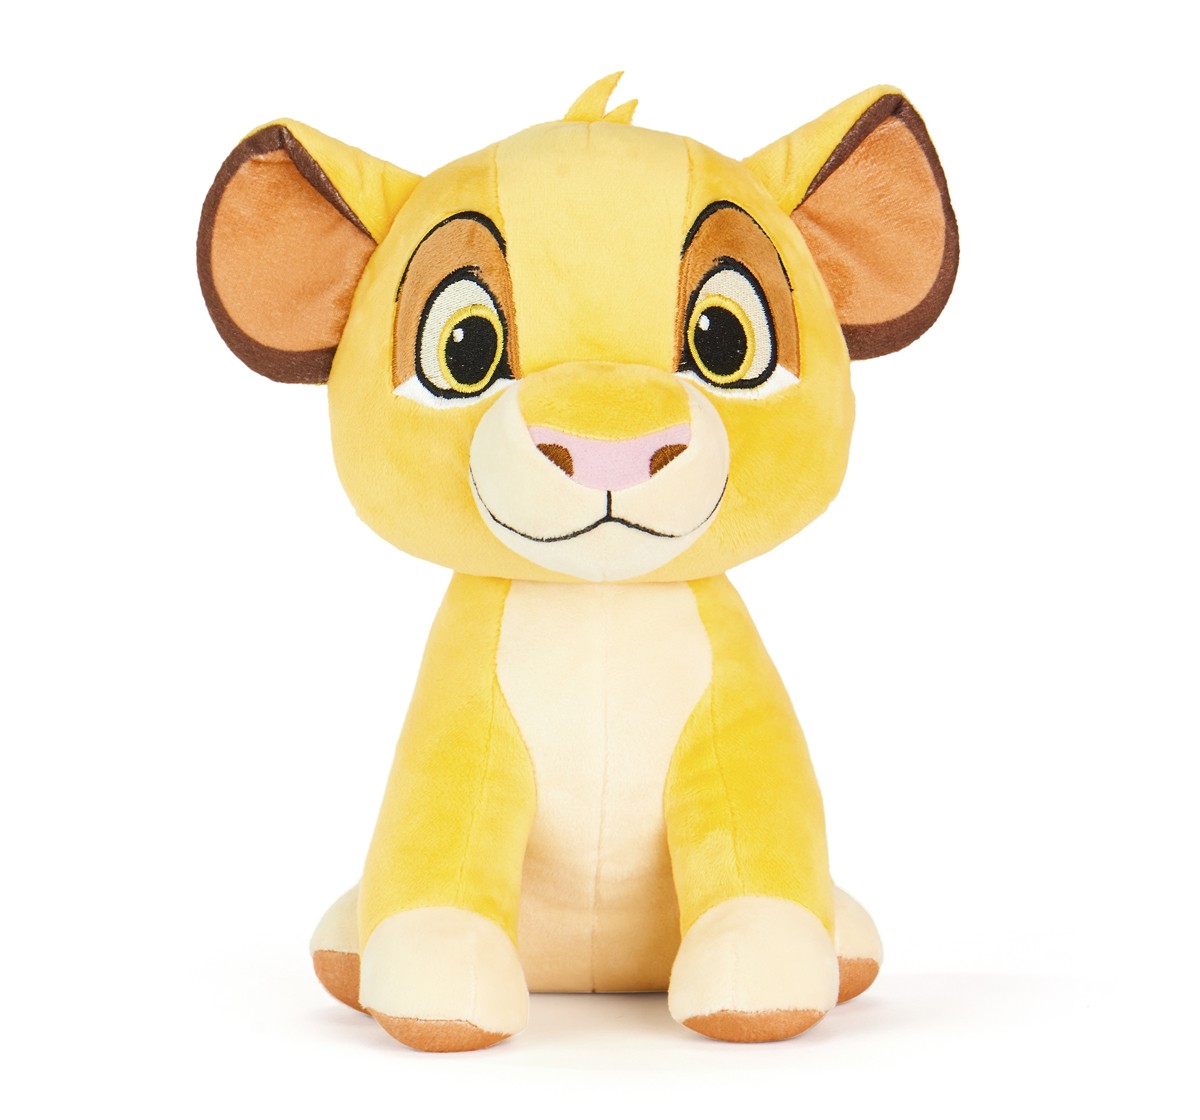 Disney Classic Simba 9 Inch Soft Toy for Kids, Multicolor 2Y+